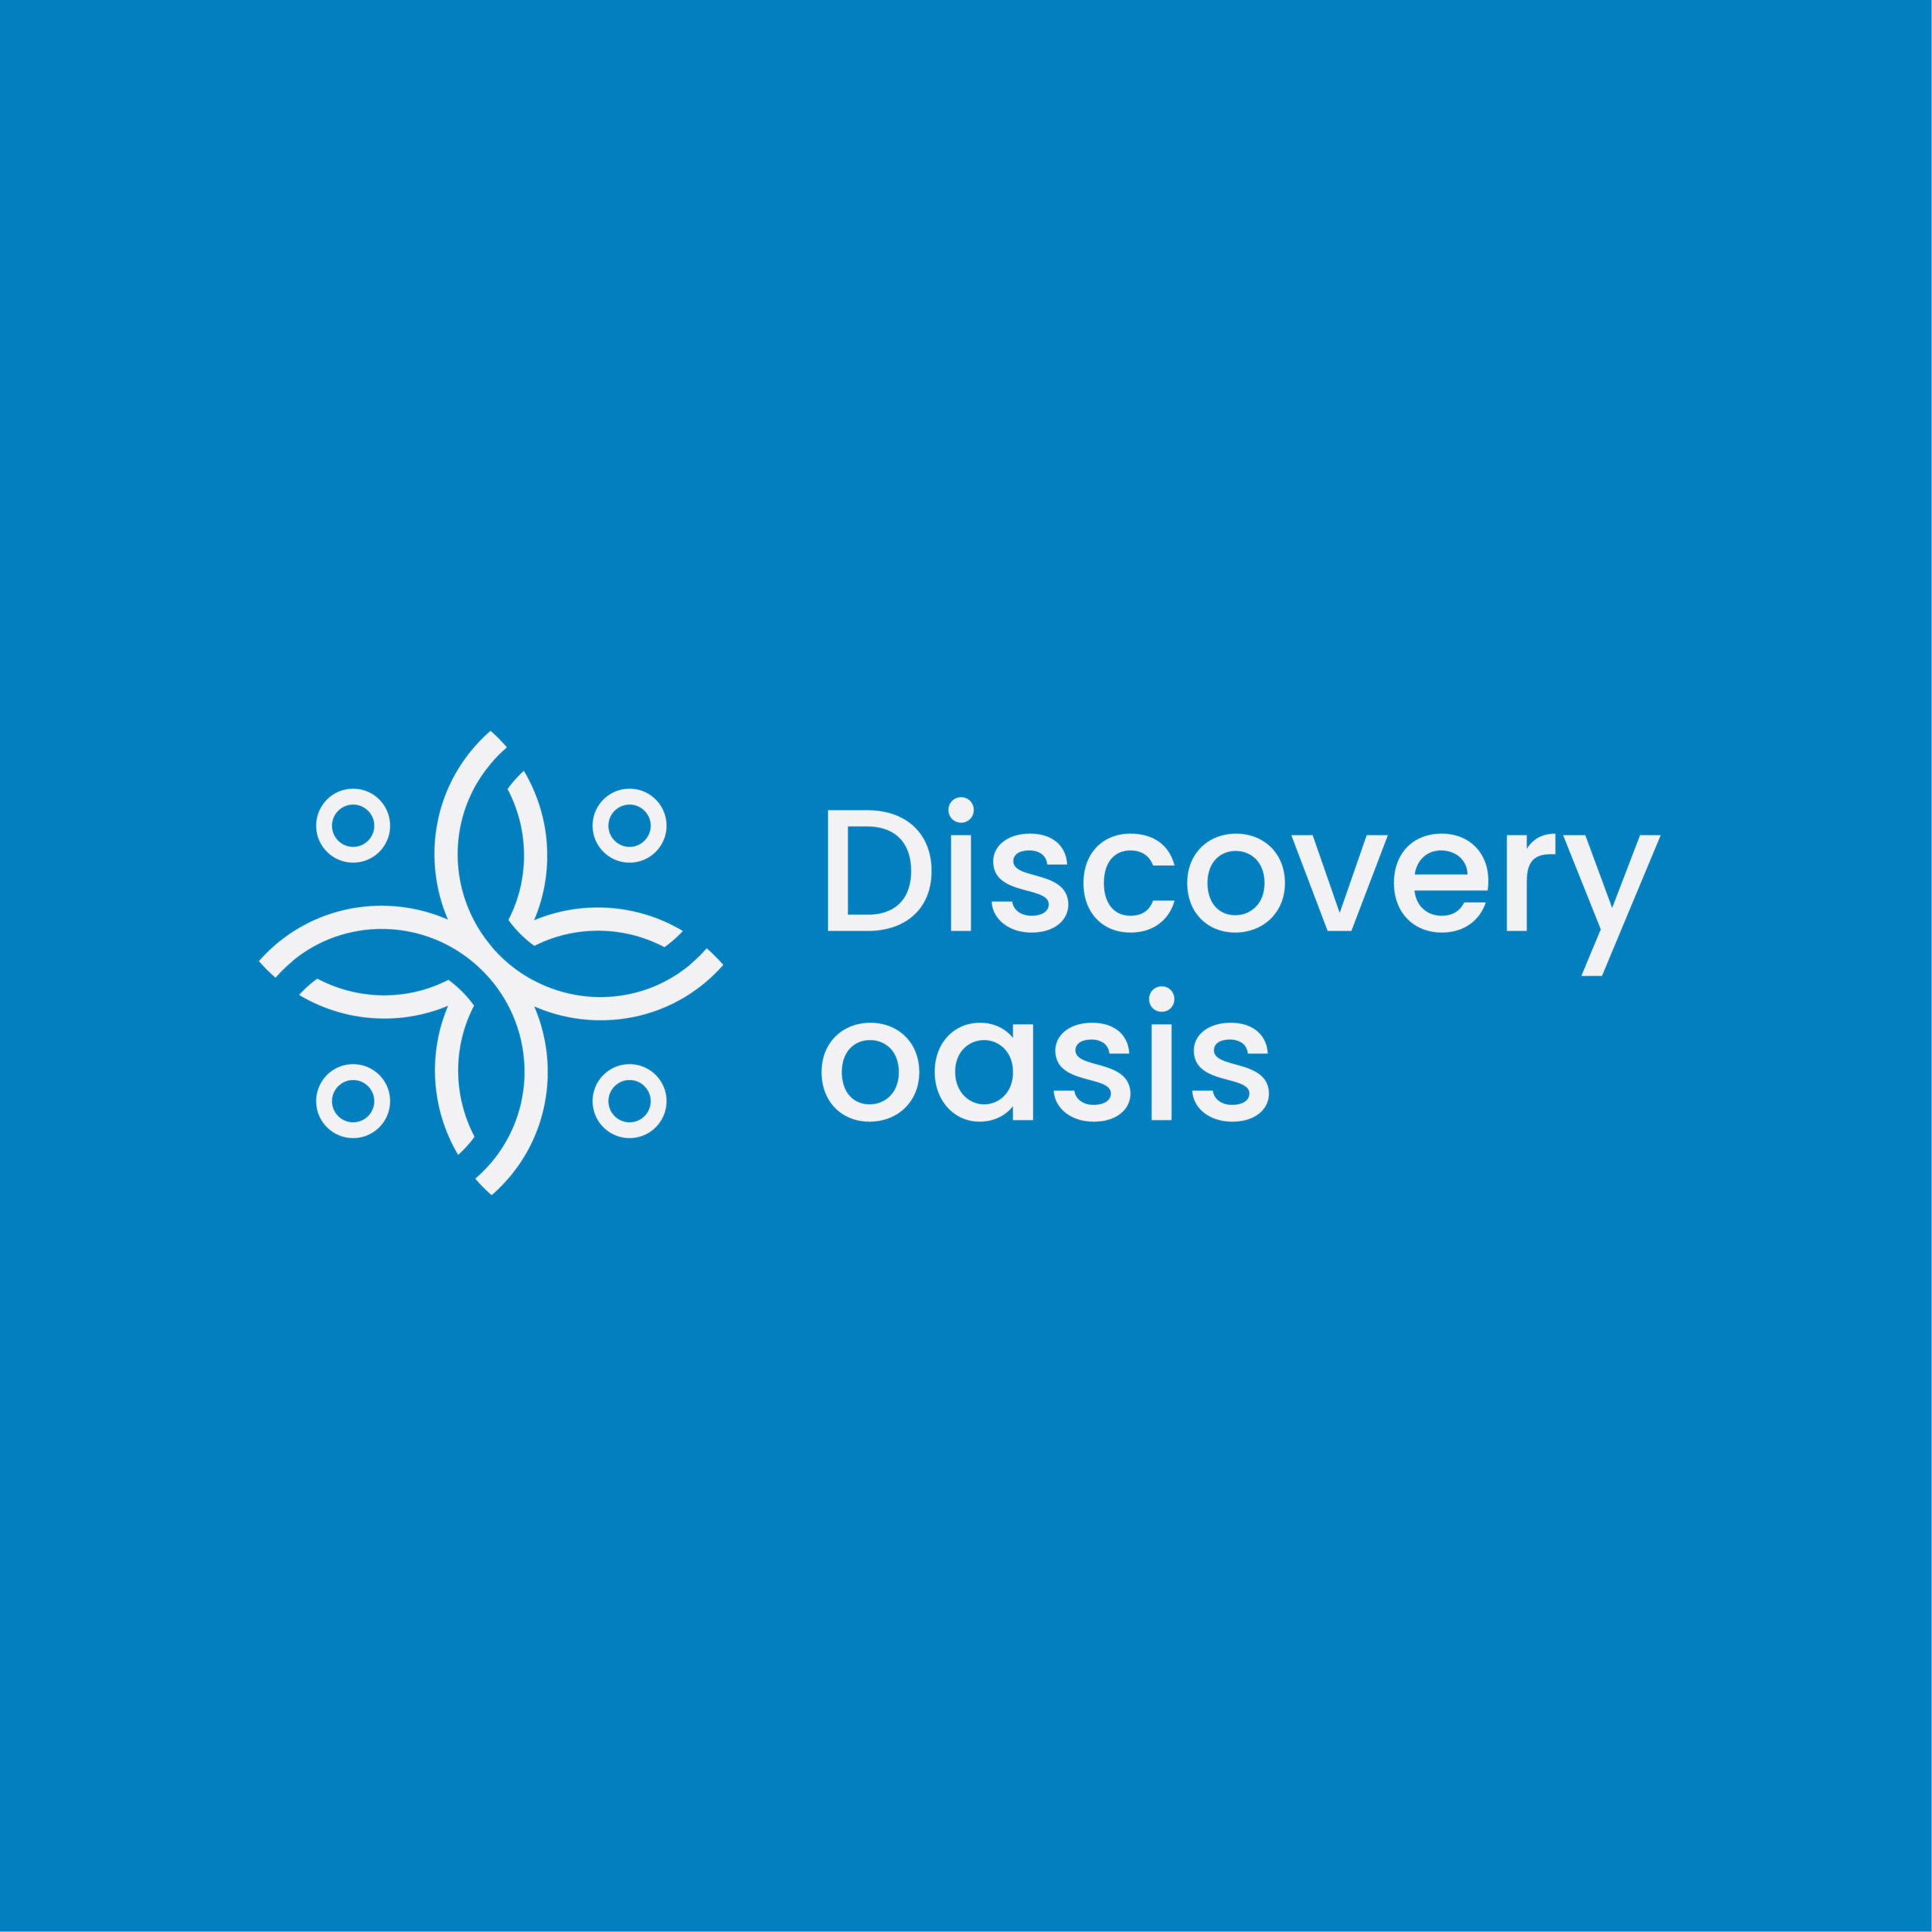 Discovery-oasis-logo-variations-02